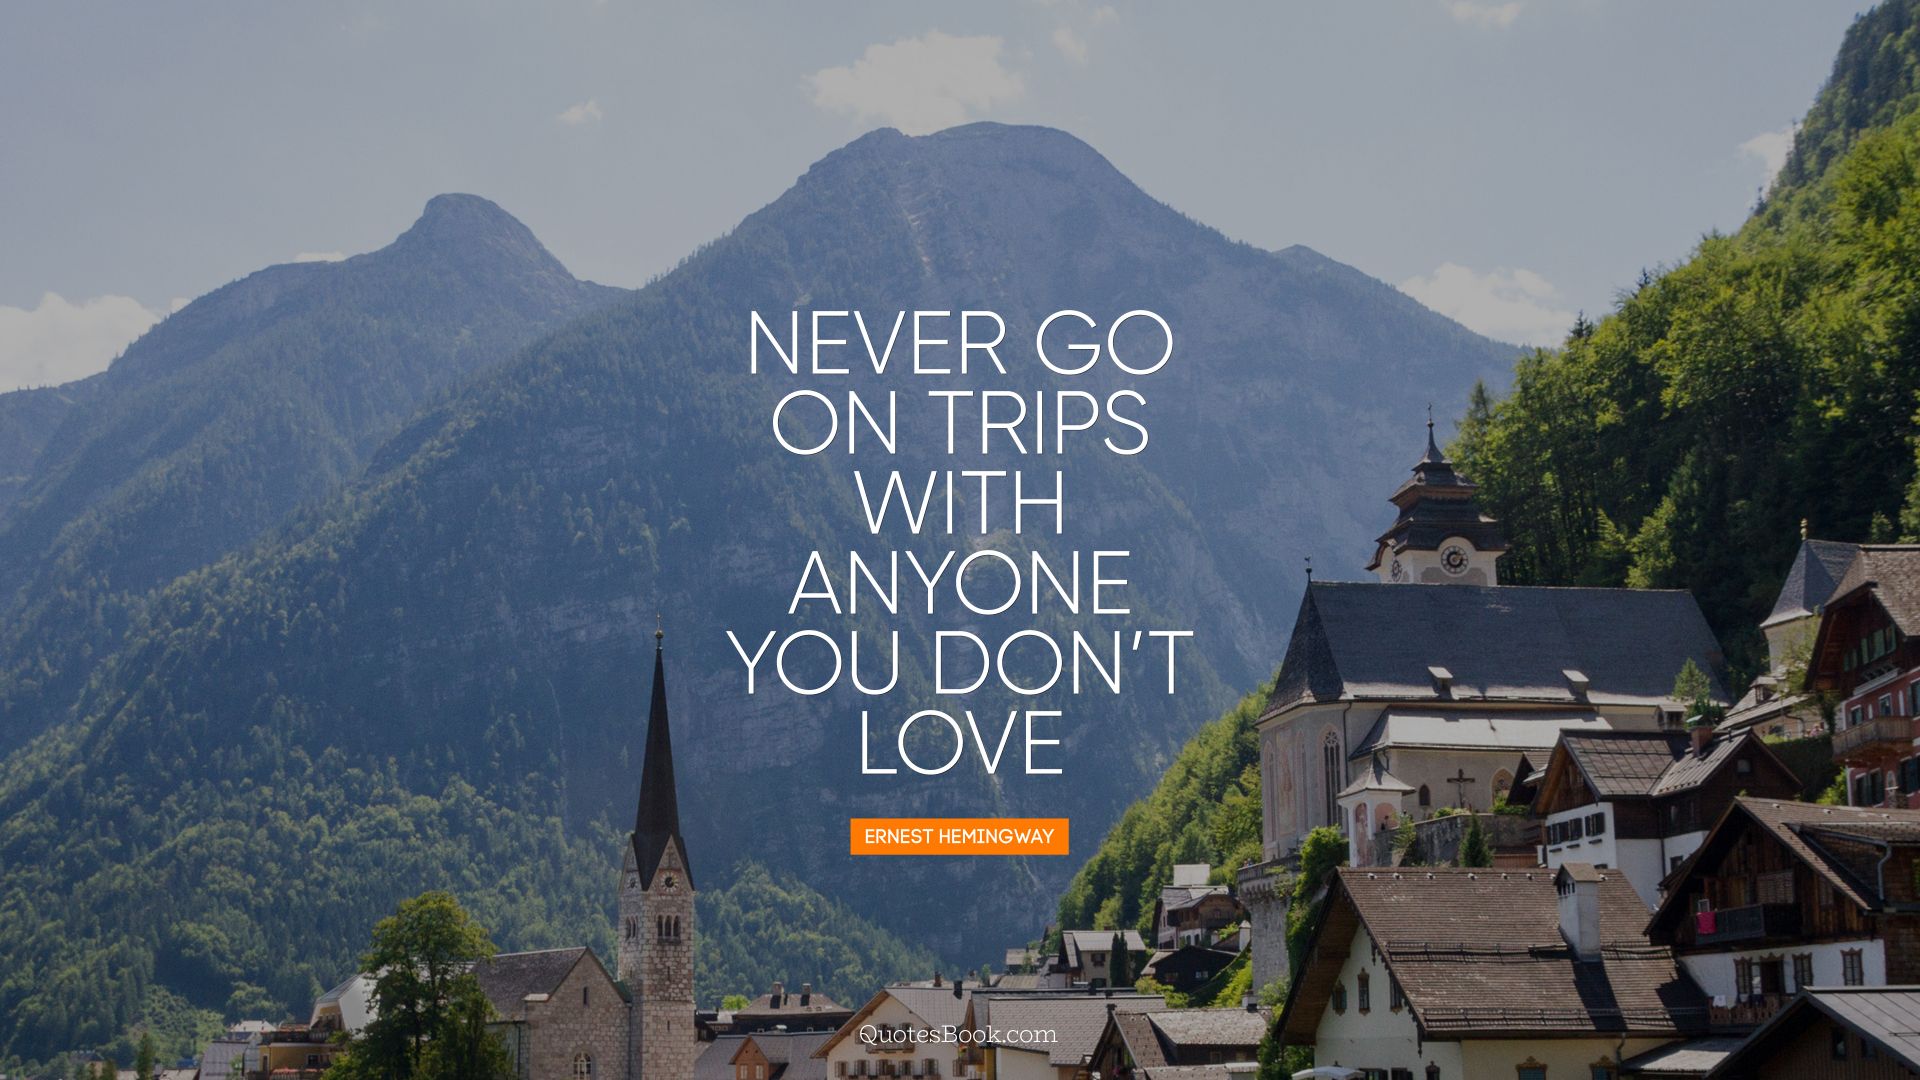 Never go on trips with anyone you do not love. - Quote by Ernest Hemingway